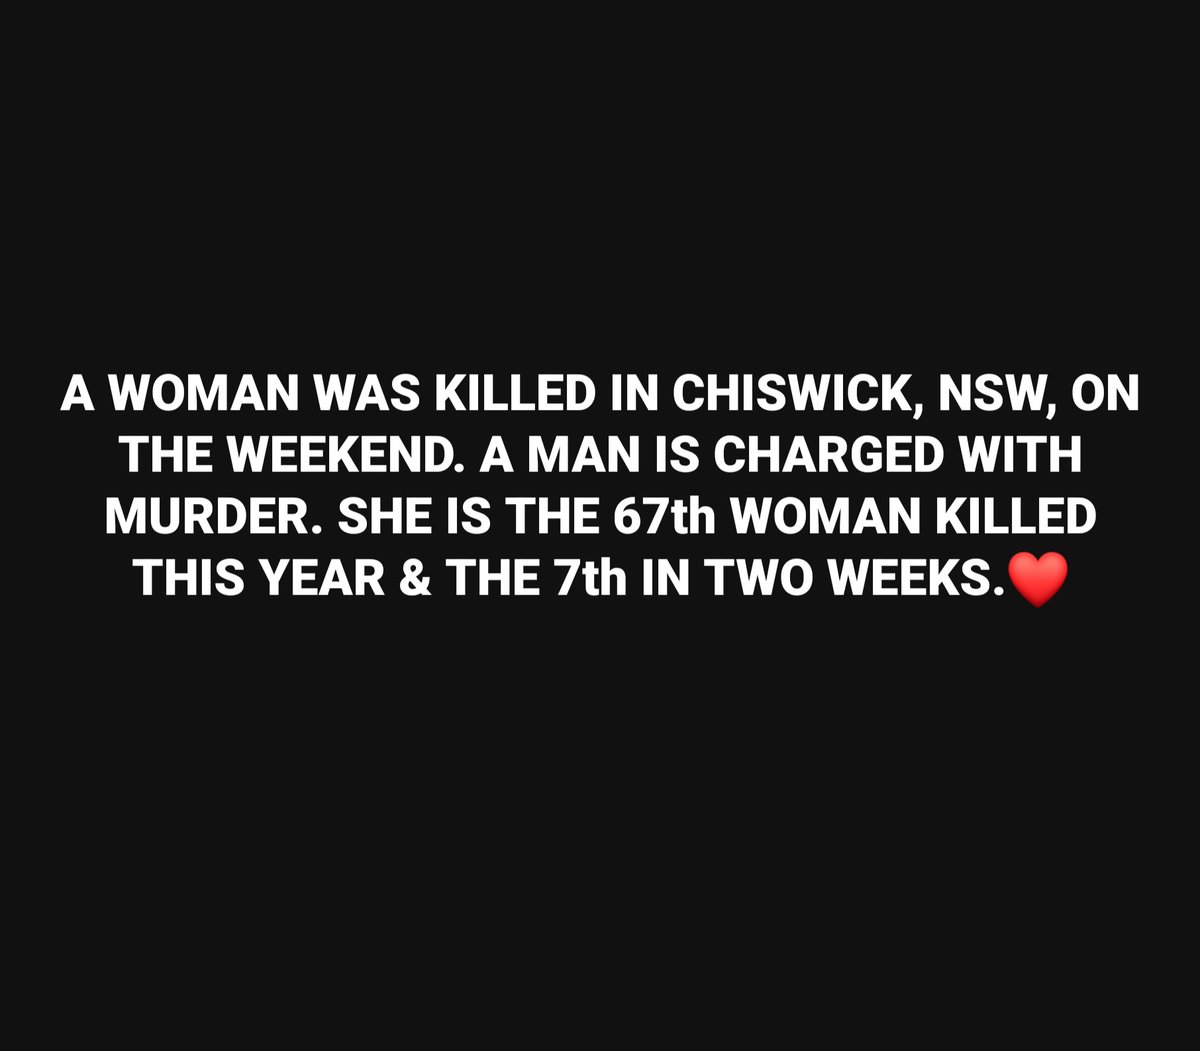 On Saturday, the body of a woman, aged in her 40s, was found in a home in Chiswick, NSW. Today, her partner is charged with her murder. She is the 7th woman killed in the past two weeks and the 67th woman killed this year. She died during the 16 Days of Activism to End Gendered…